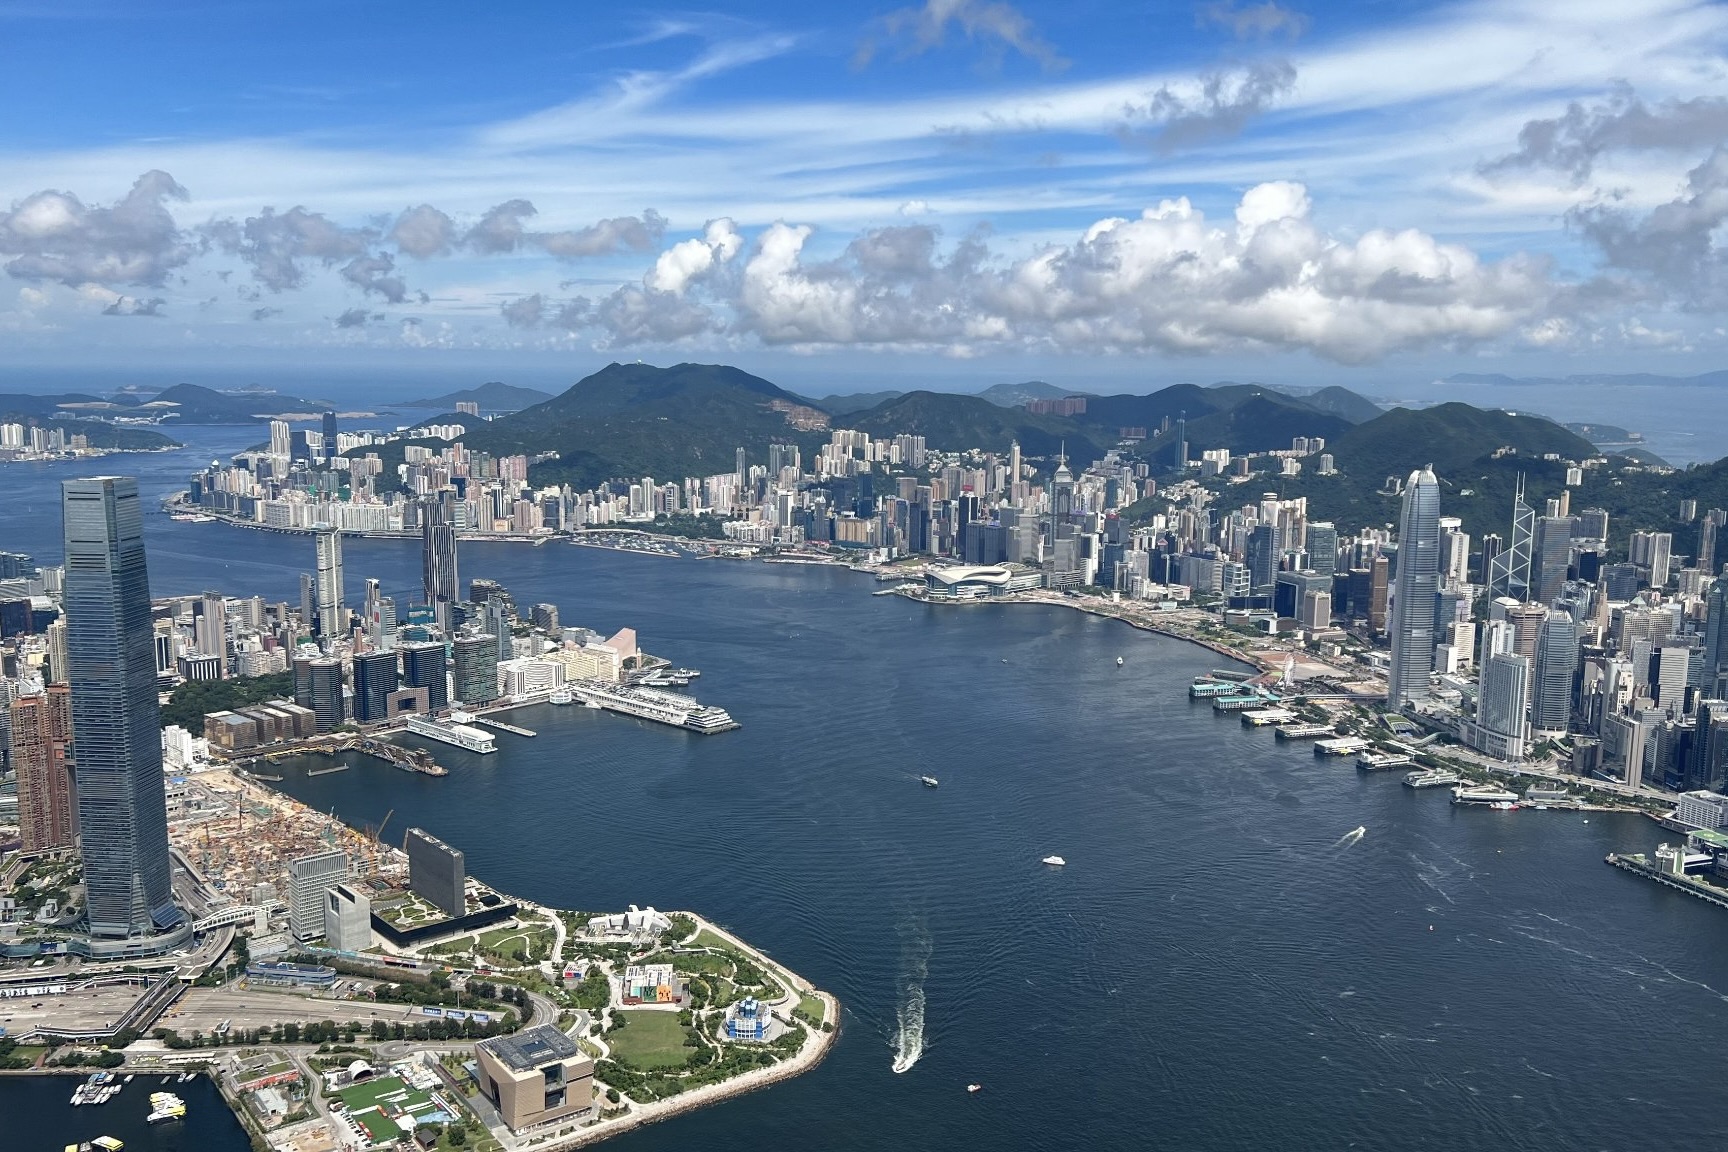 An overhead view of the Hong Kong Island and Kowloon sides of Victoria Harbour.